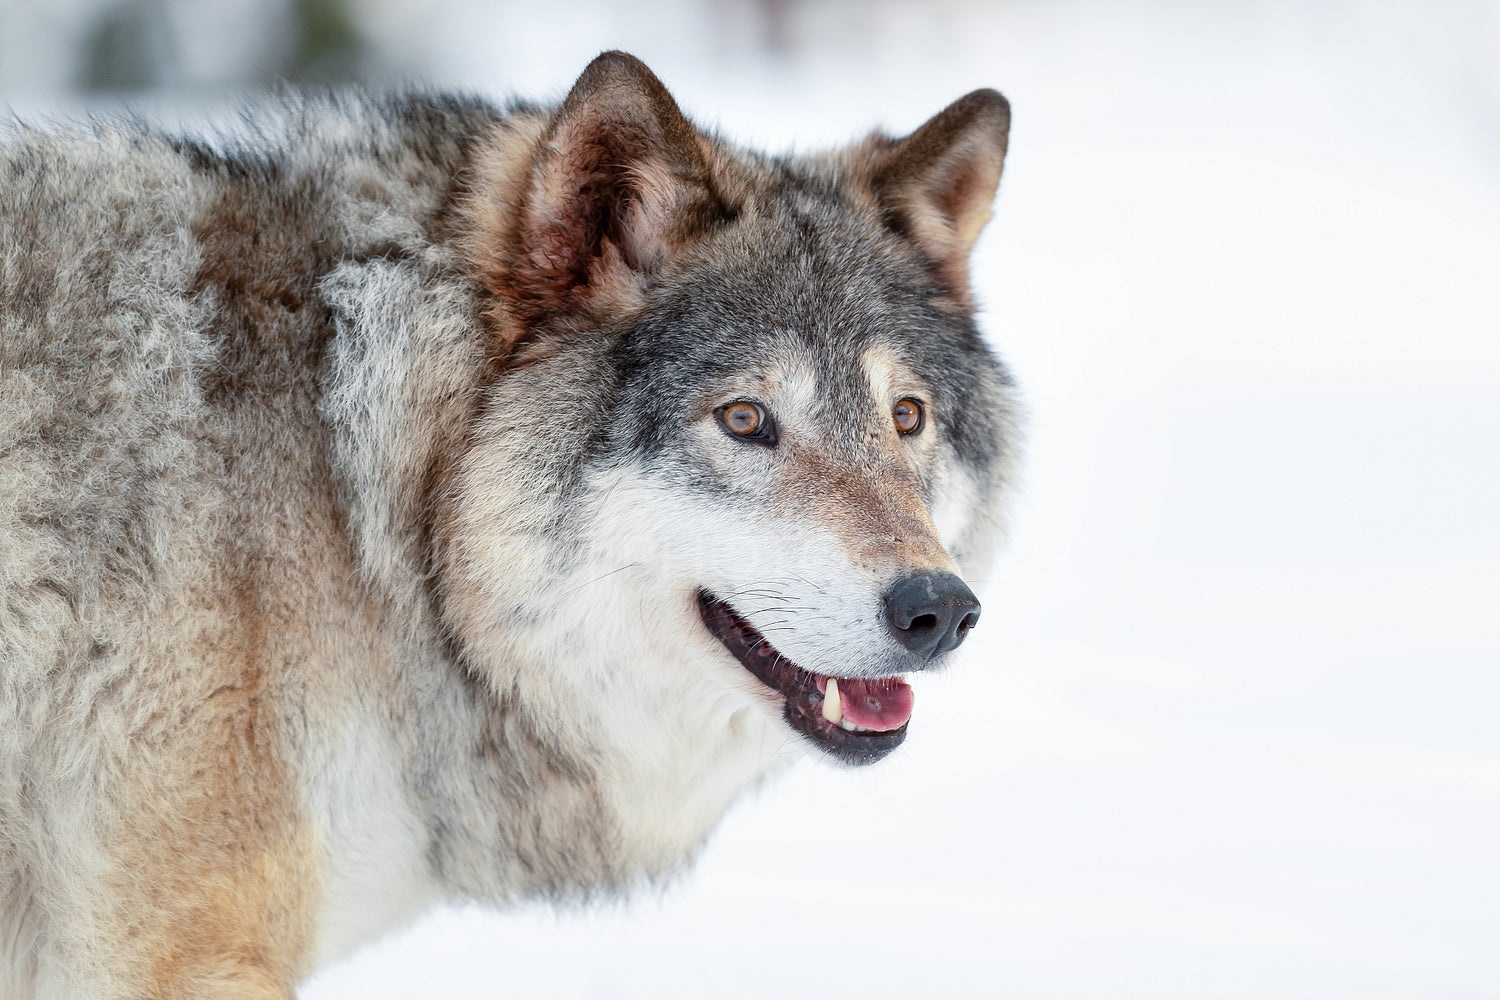 Eurasian wolf standing on snowy ground in the forest